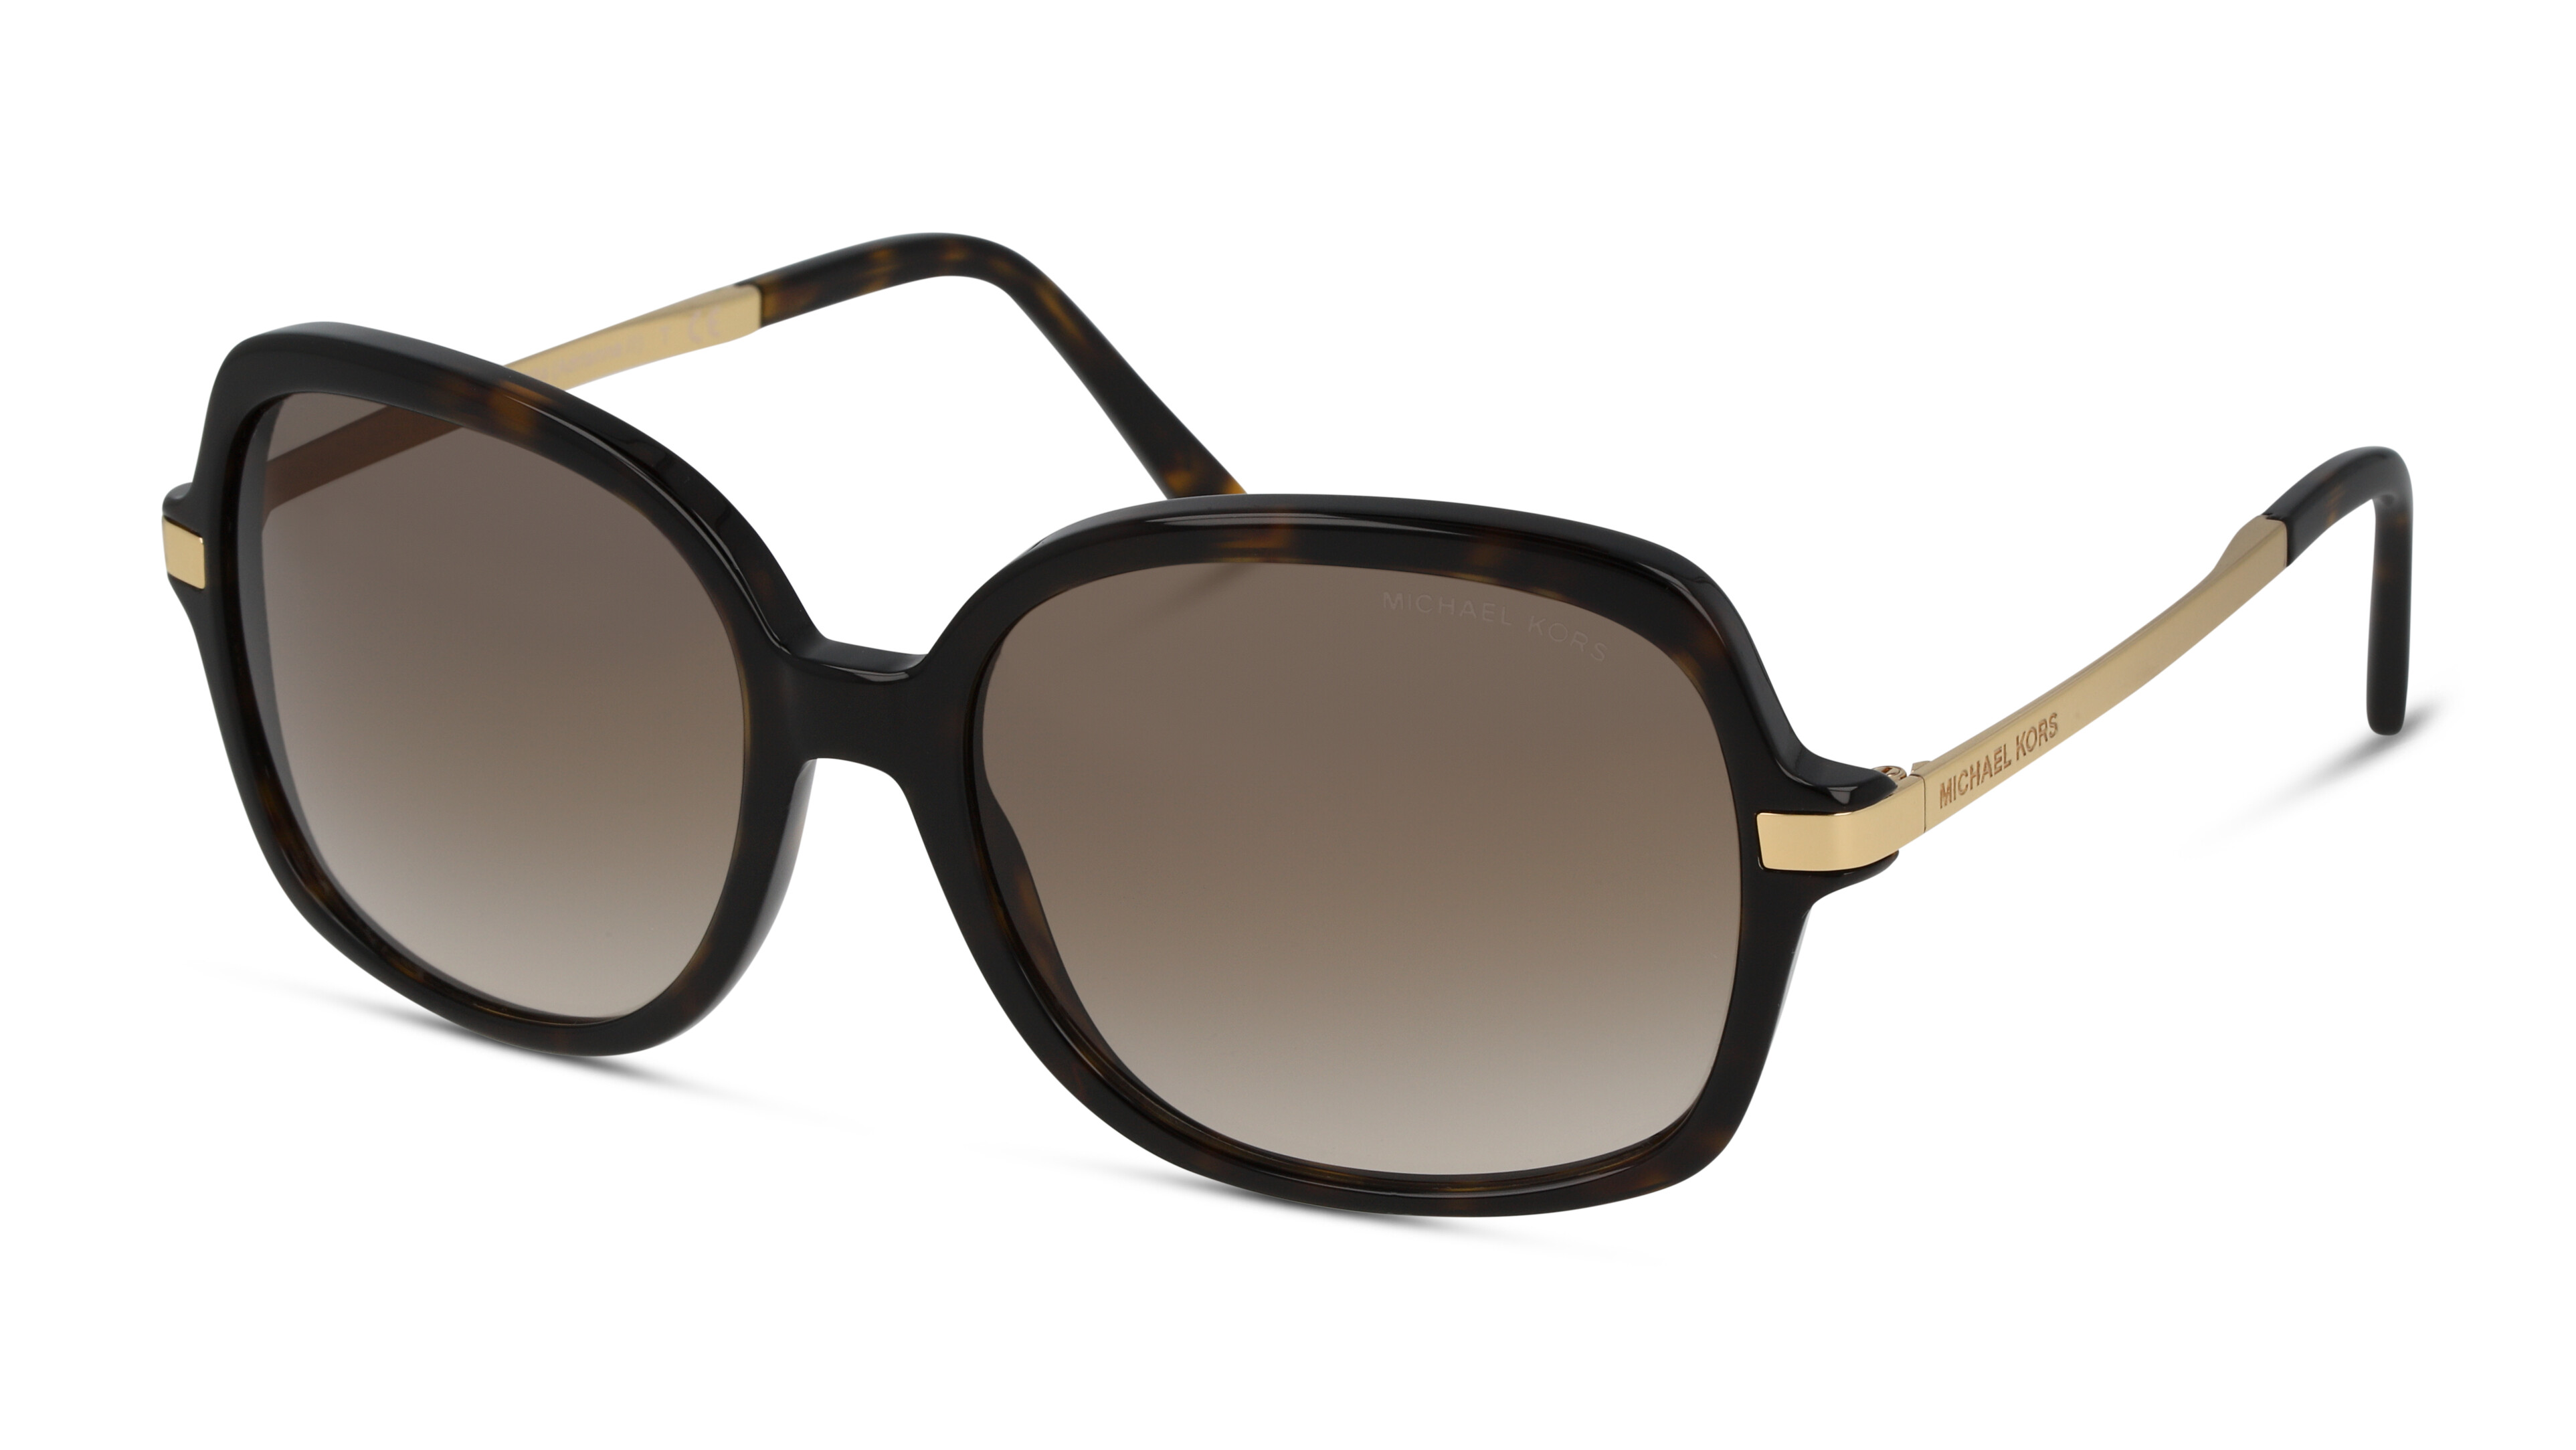 [products.image.angle_left01] Michael Kors ADRIANNA II 0MK2024 310613 Sonnenbrille